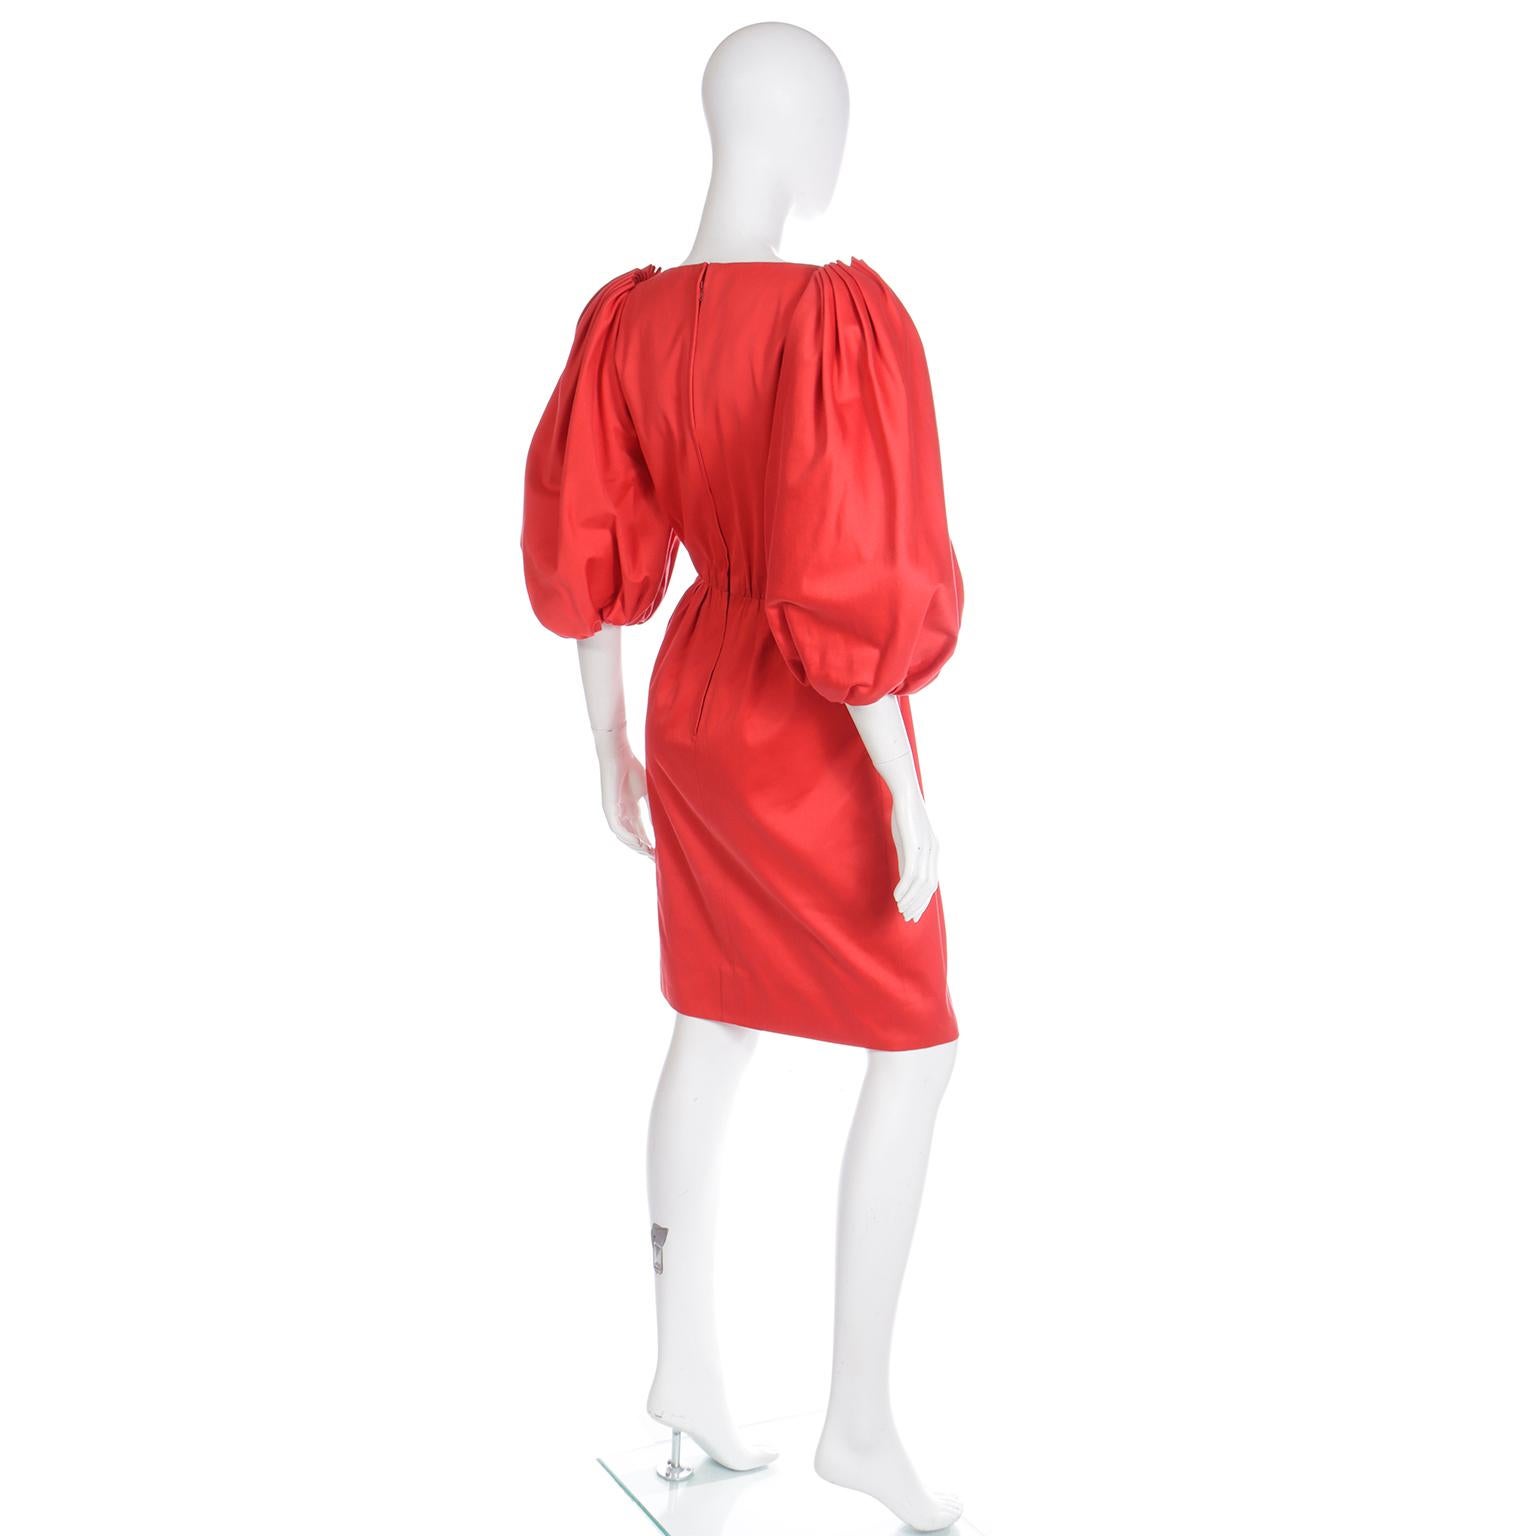 Yves Saint Laurent 1989 Vintage Red Runway Dress with Puff Statement Sleeves 2